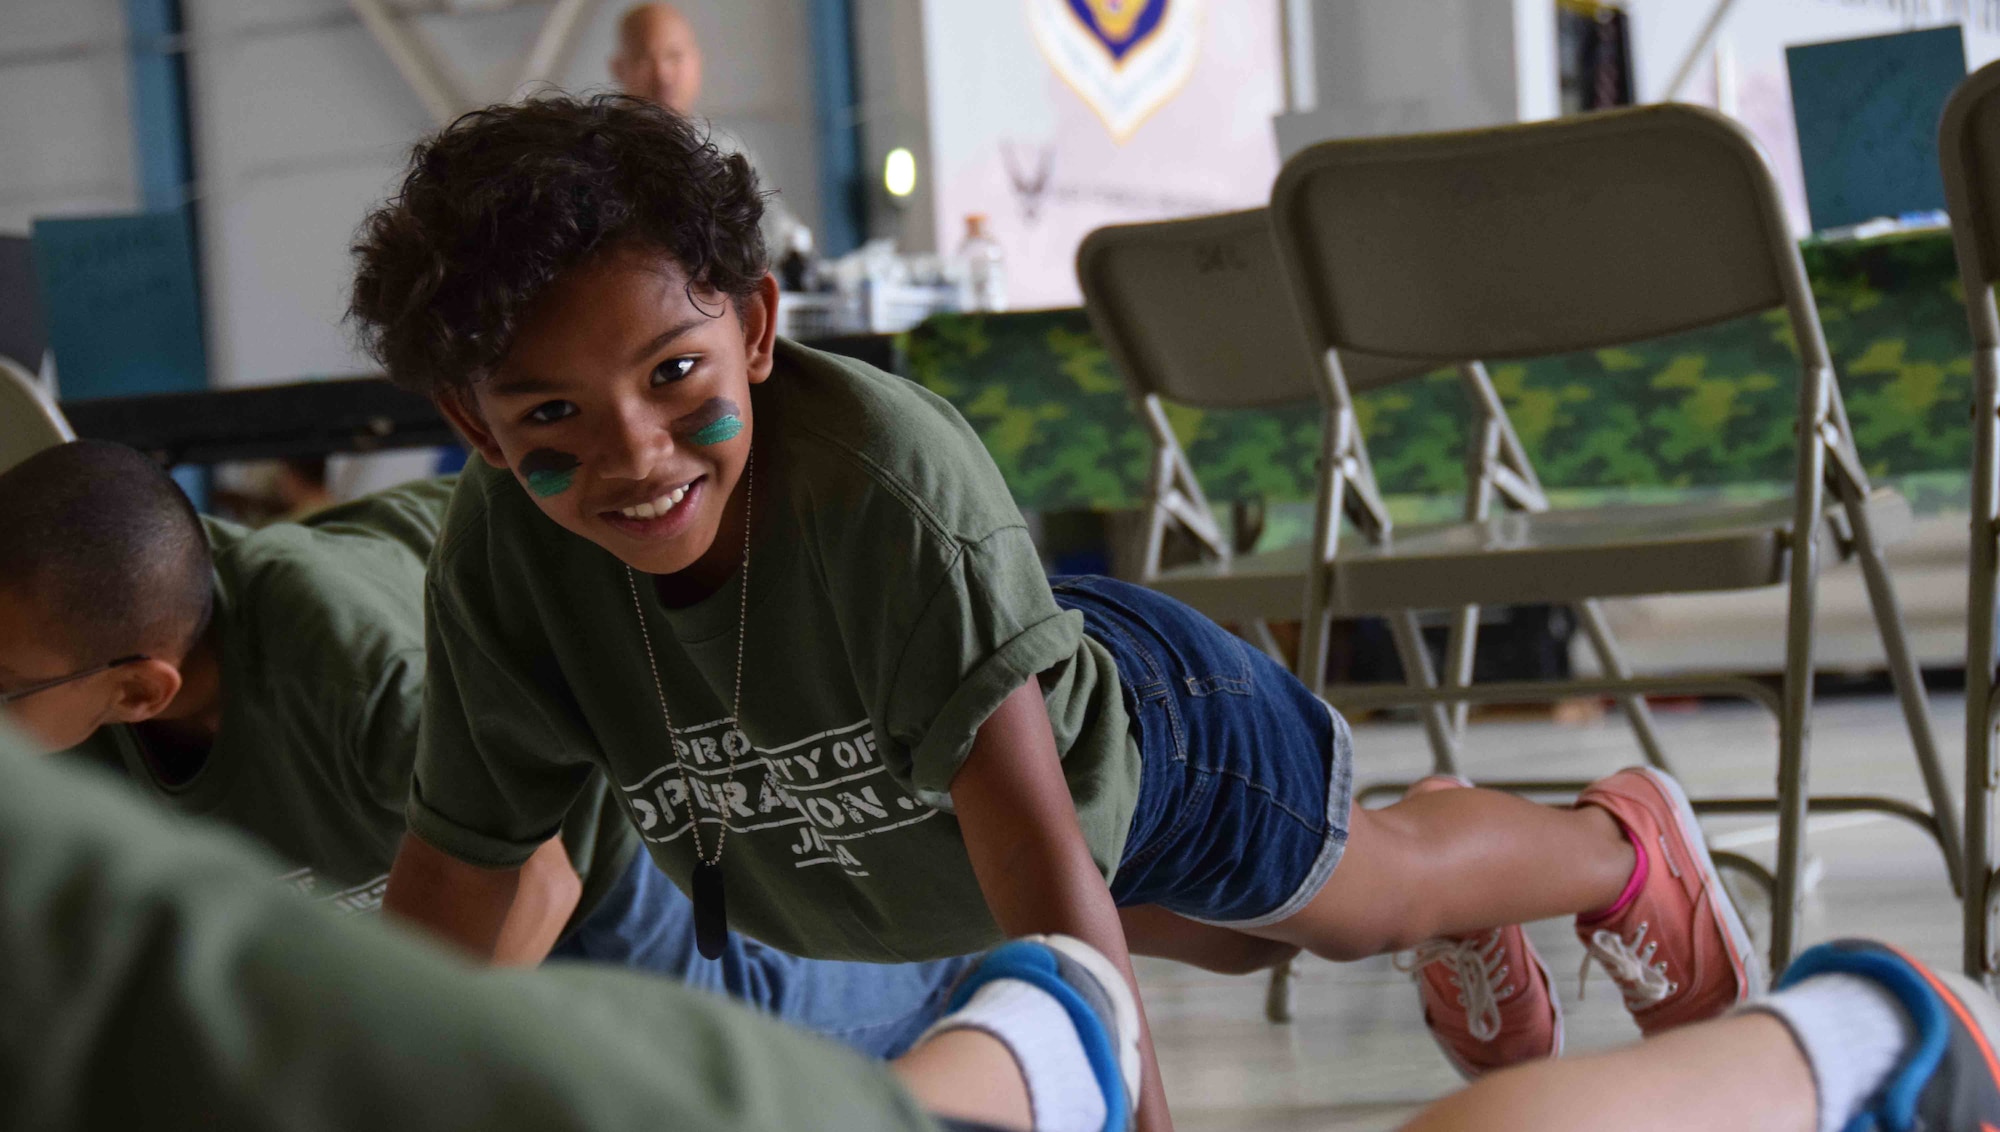 Mya Charles was one of 200 children who participated in Operation JET at Joint Base San Antonio-Lackland, Texas on July 31, 2015. One of the five stations she visited was the physical fitness area to do push ups, the obstacle course and agility challenges. (U.S. Air Force photo/Tech. Sgt. Carlos J. Trevino)